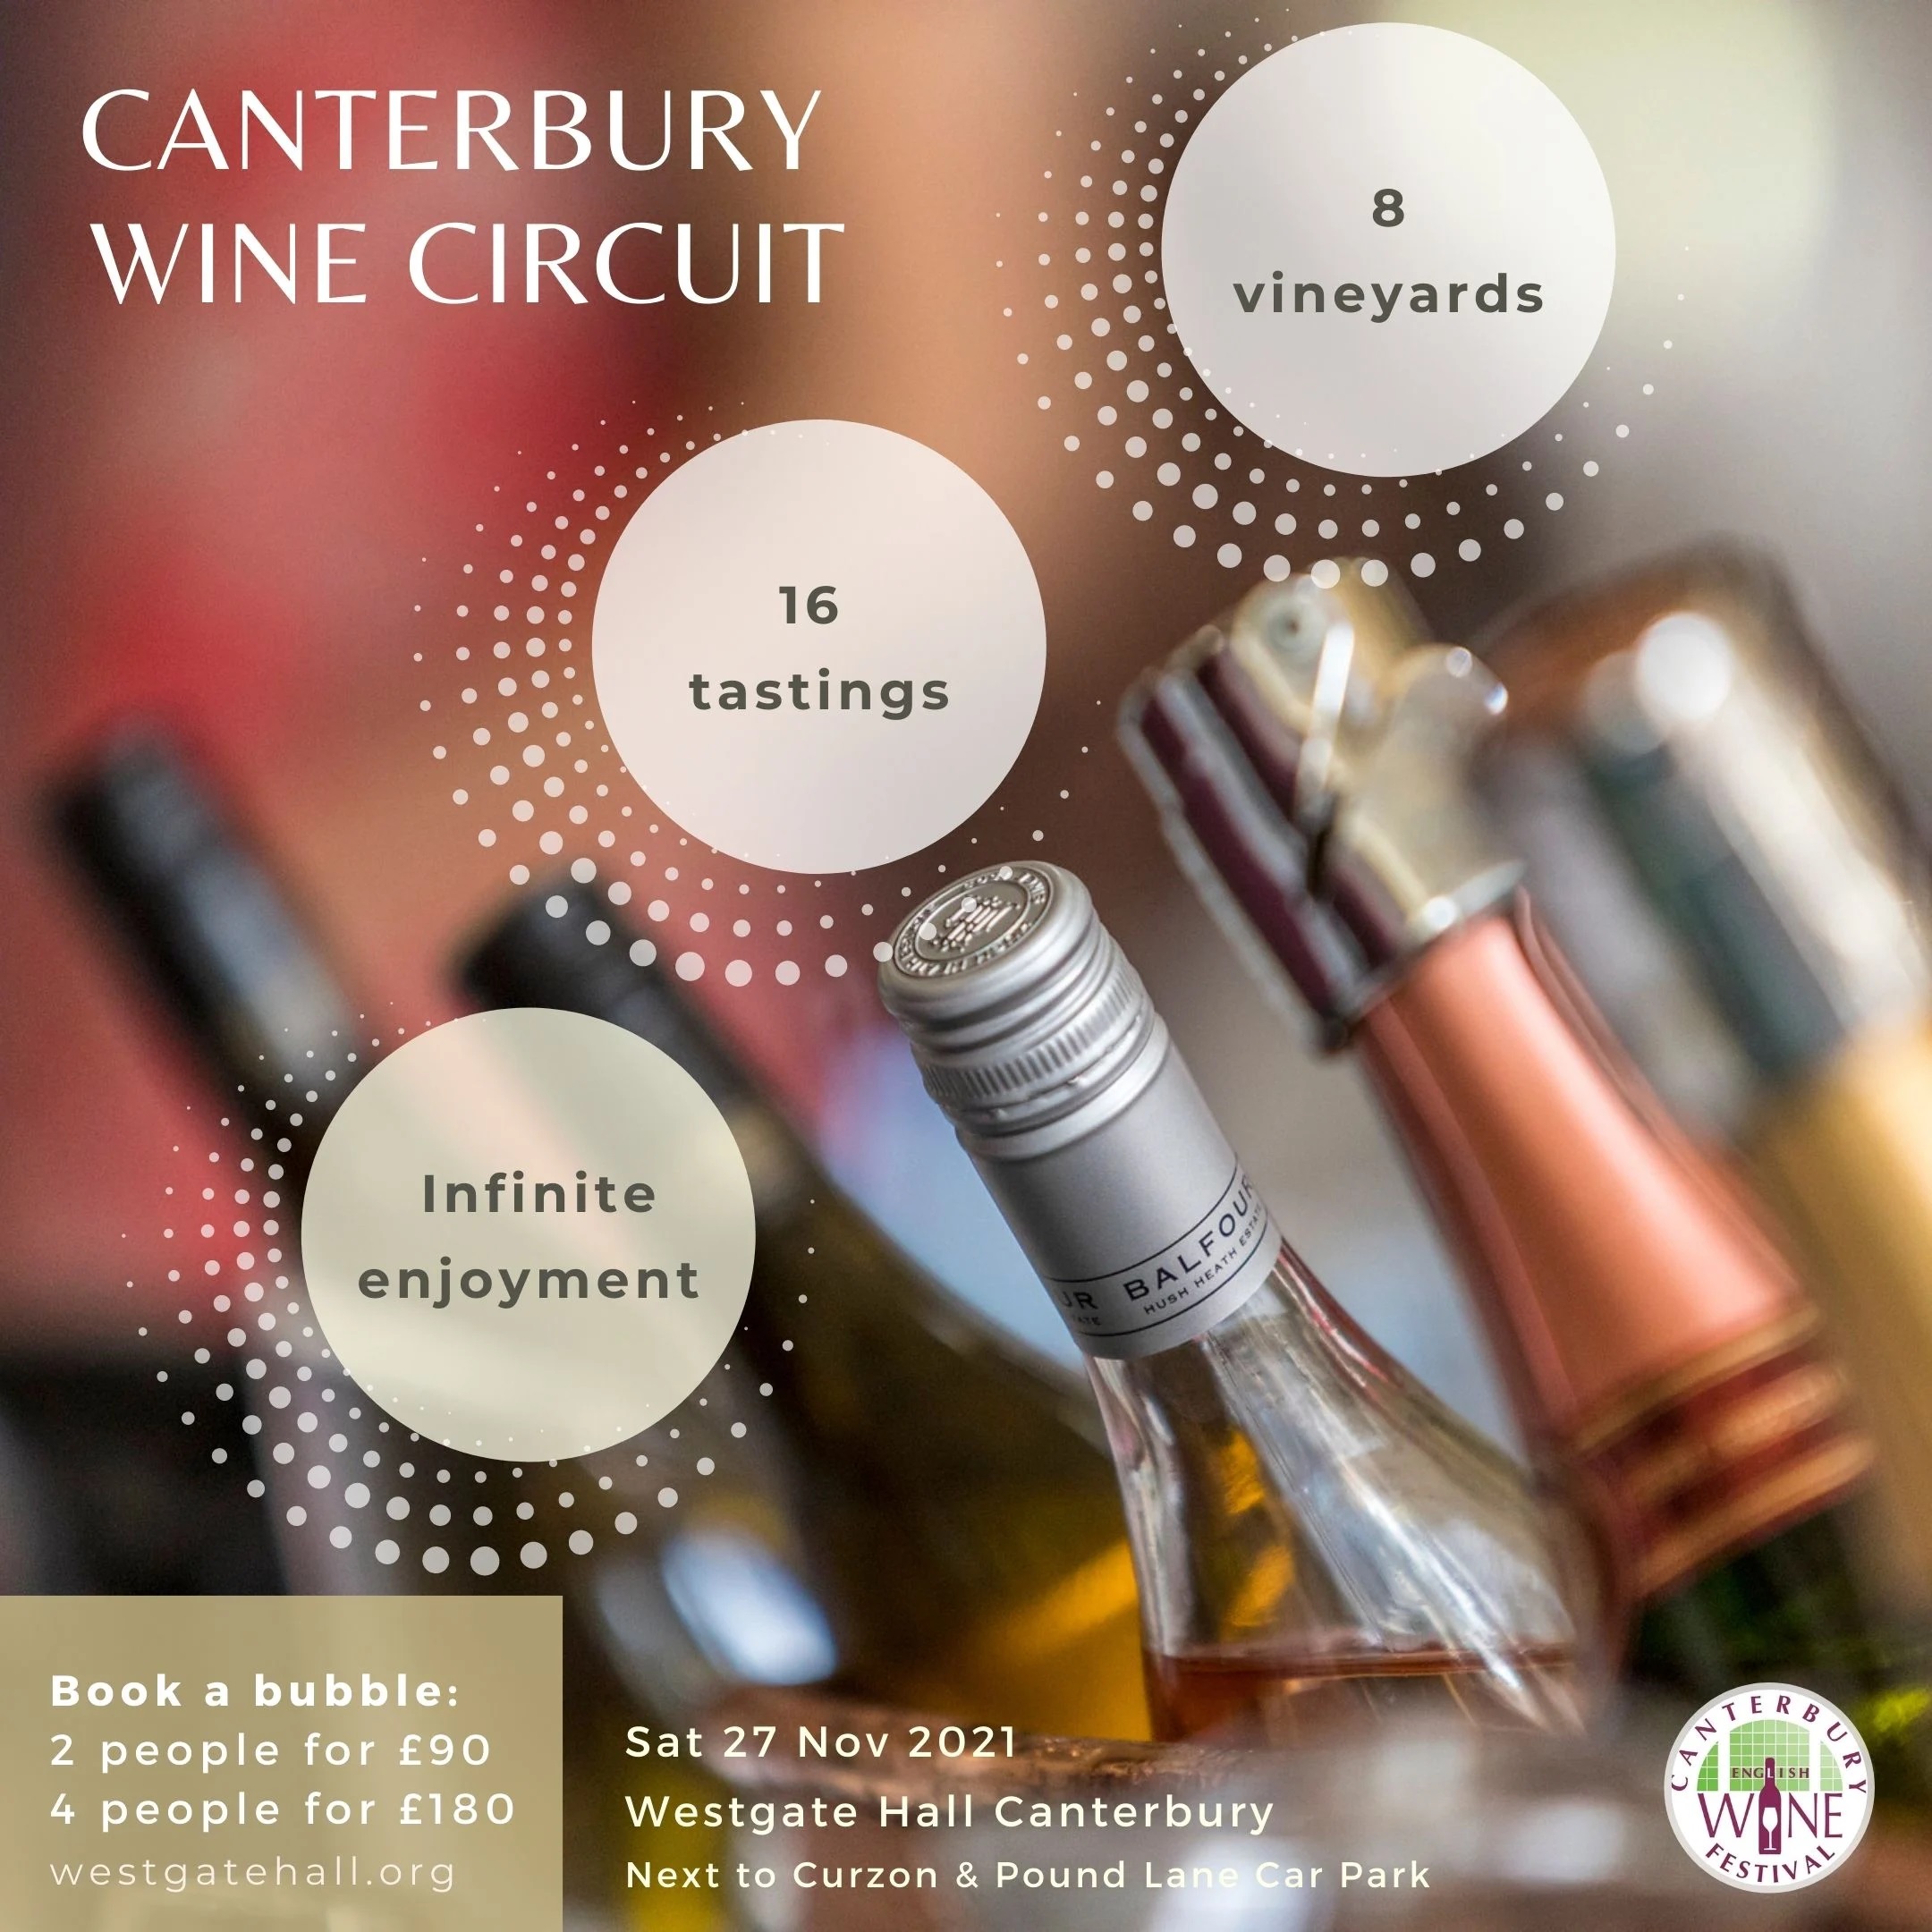 A poster for the Canterbury Wine Circuit - 8 vineyards - 16 tastings - infinite enjoyment